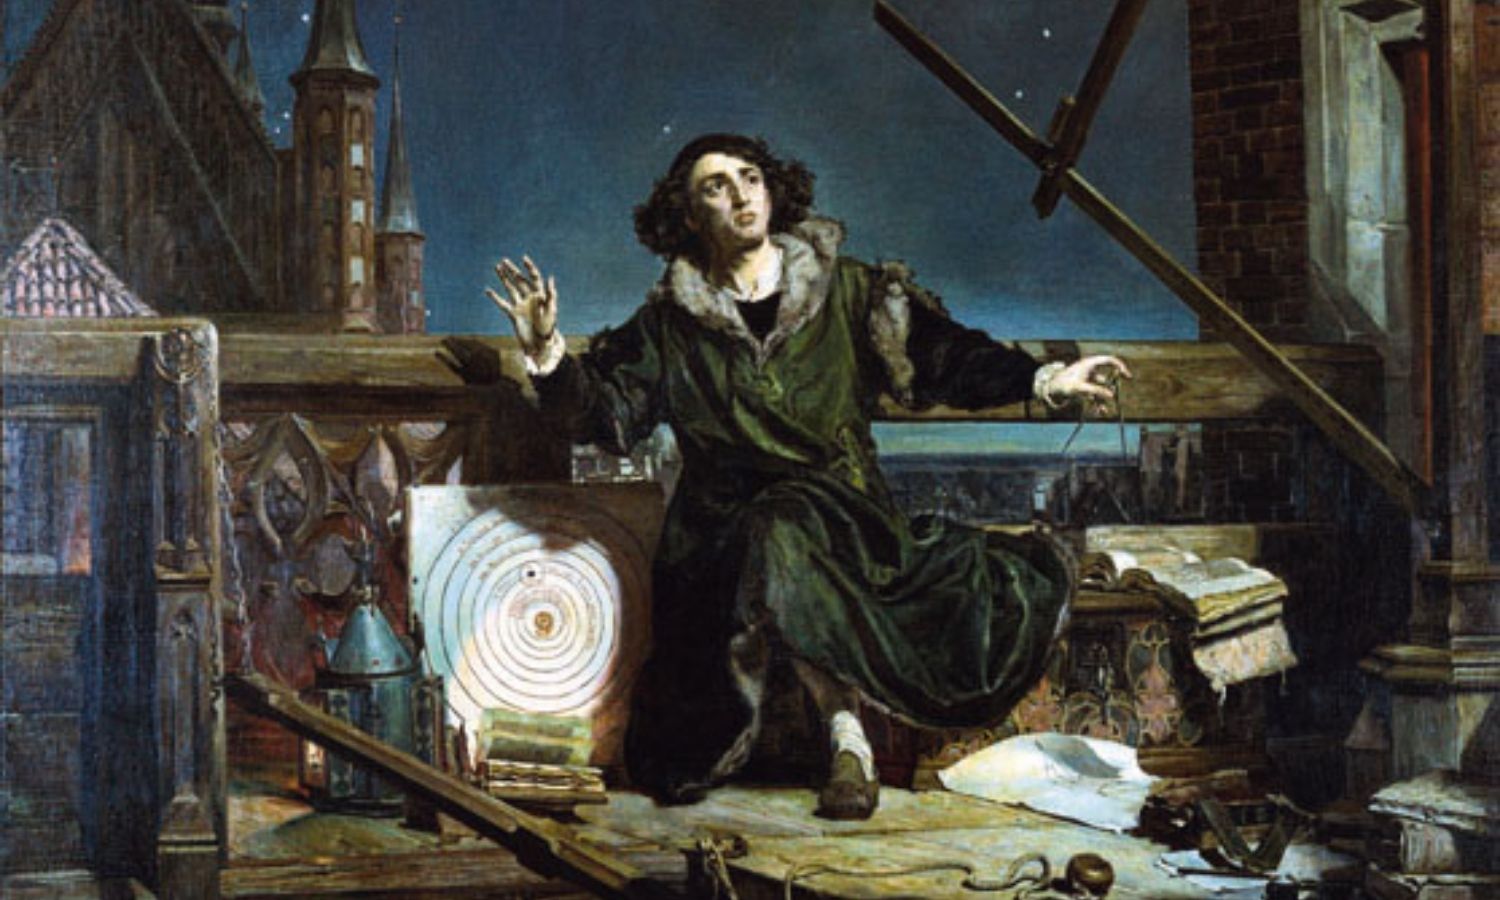 OTD in 1497: Astronomer Nicolaus Copernicus recorded his first observation after witnessing a moon eclipse with a distant star.